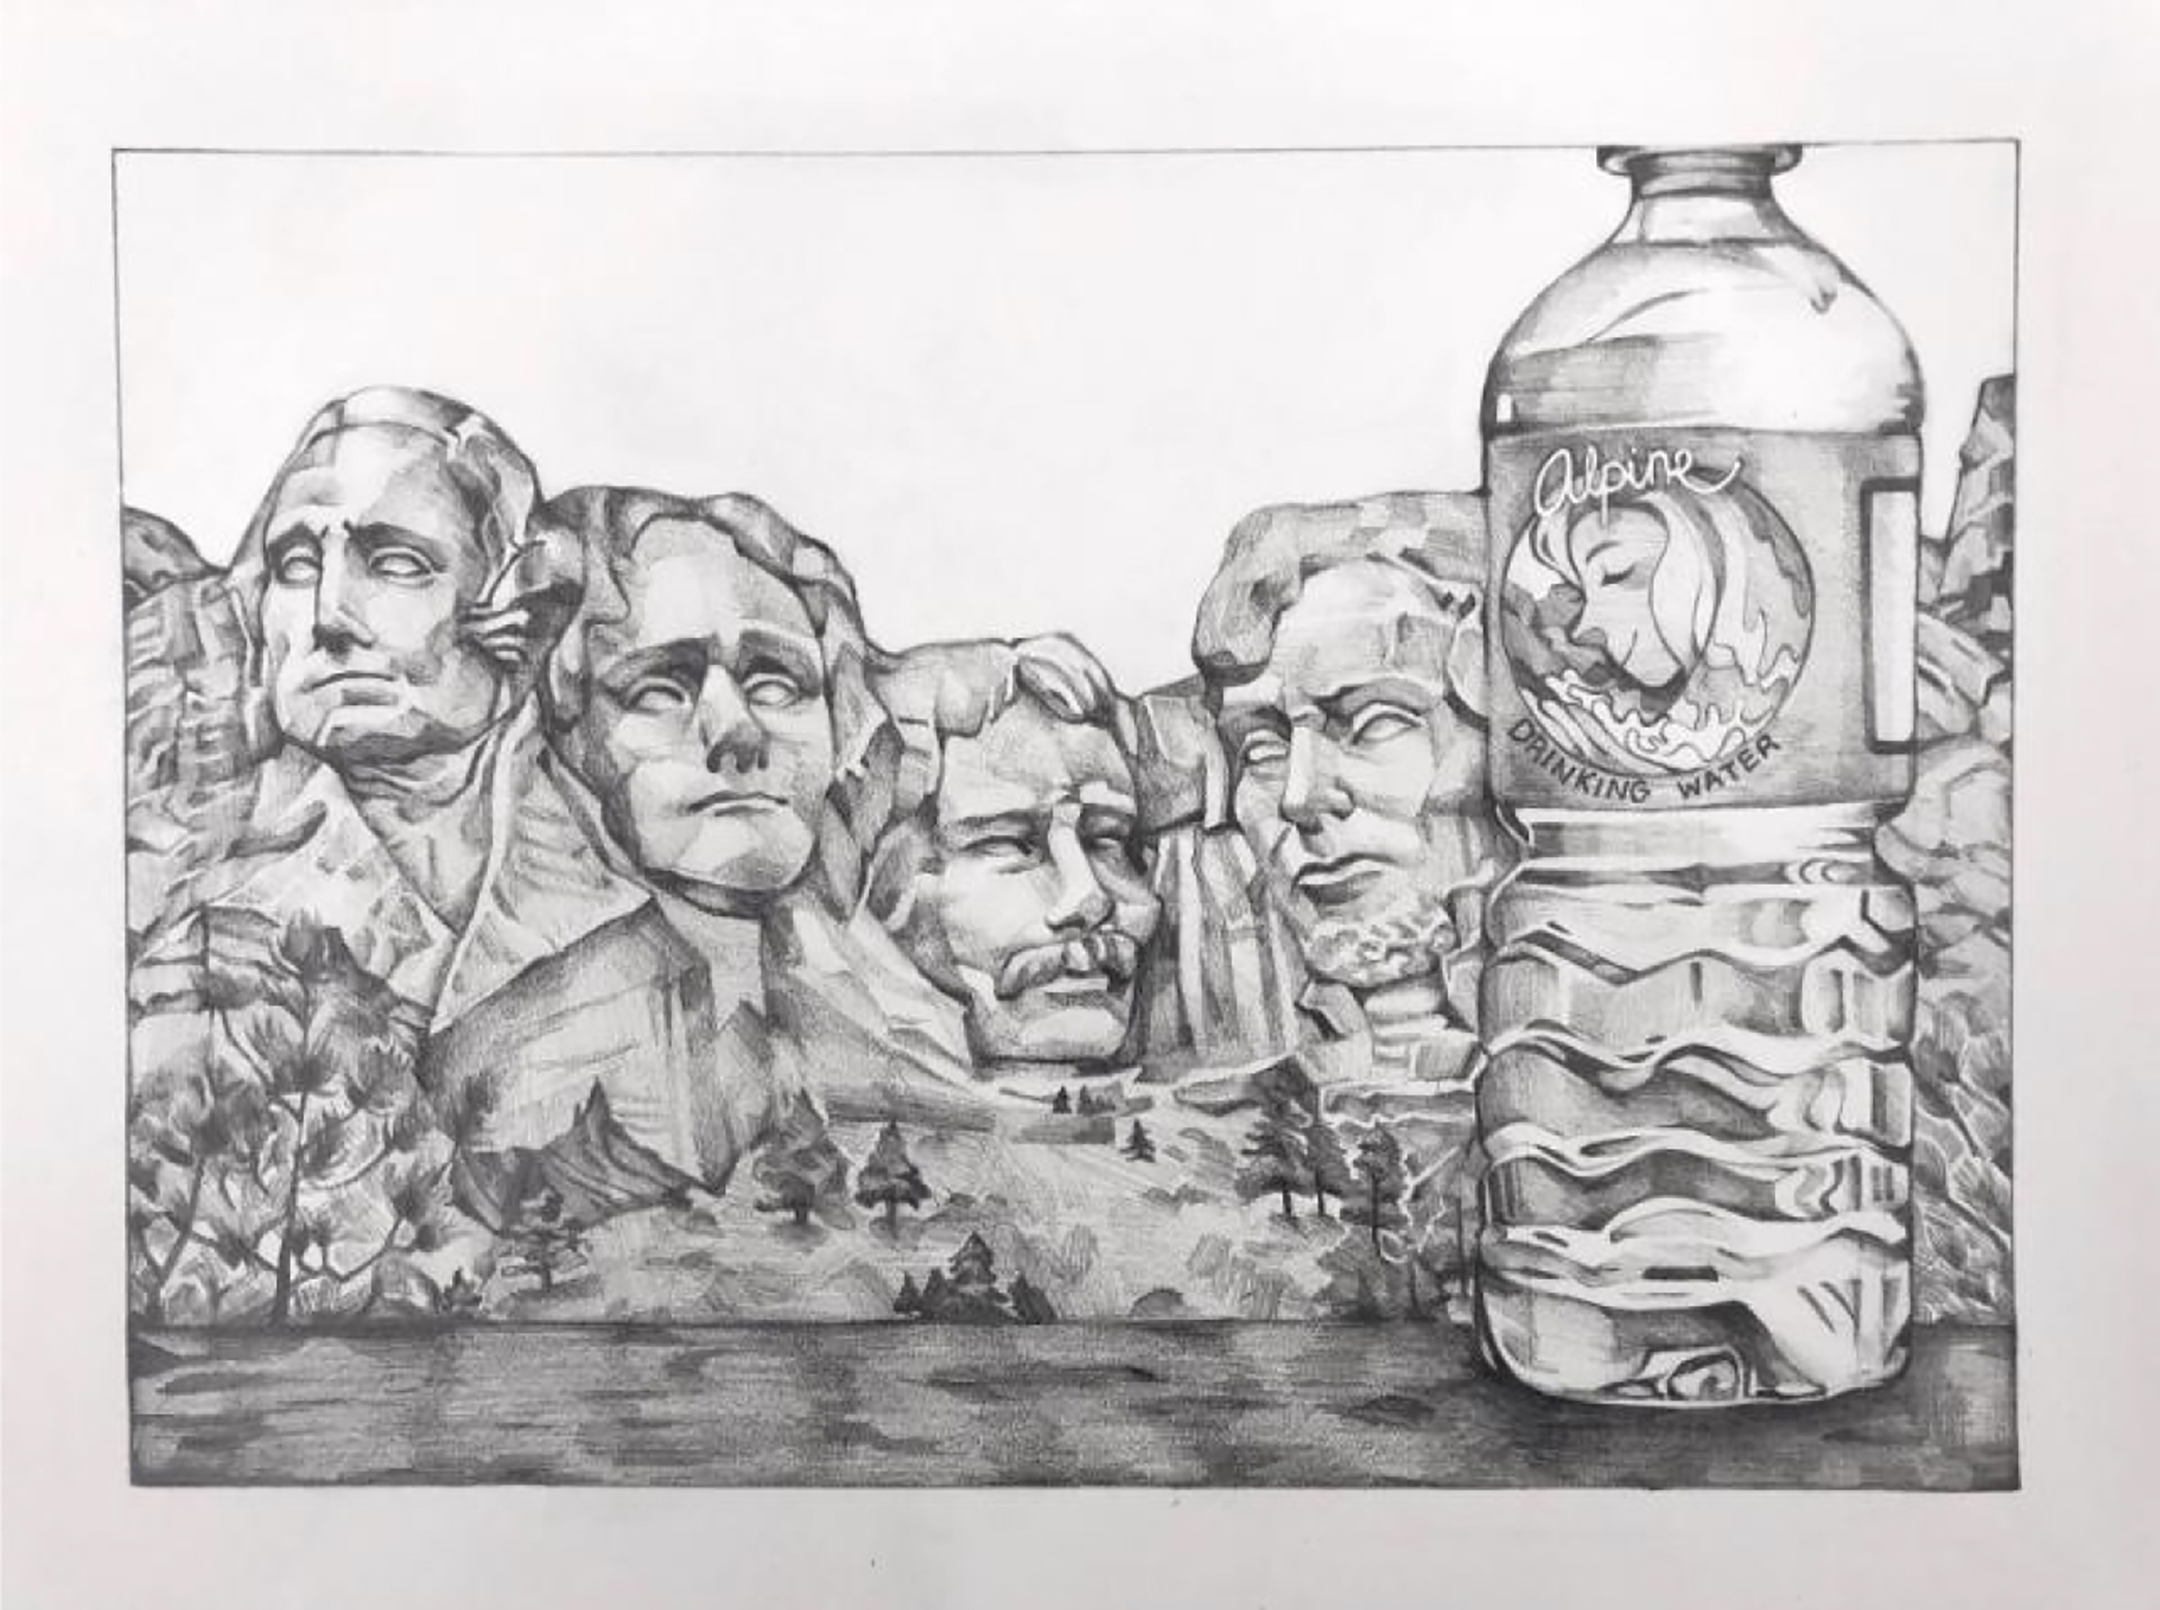 Black and white drawing of Mt. Rushmore with a plastic bottle held up in front of it on the far right side